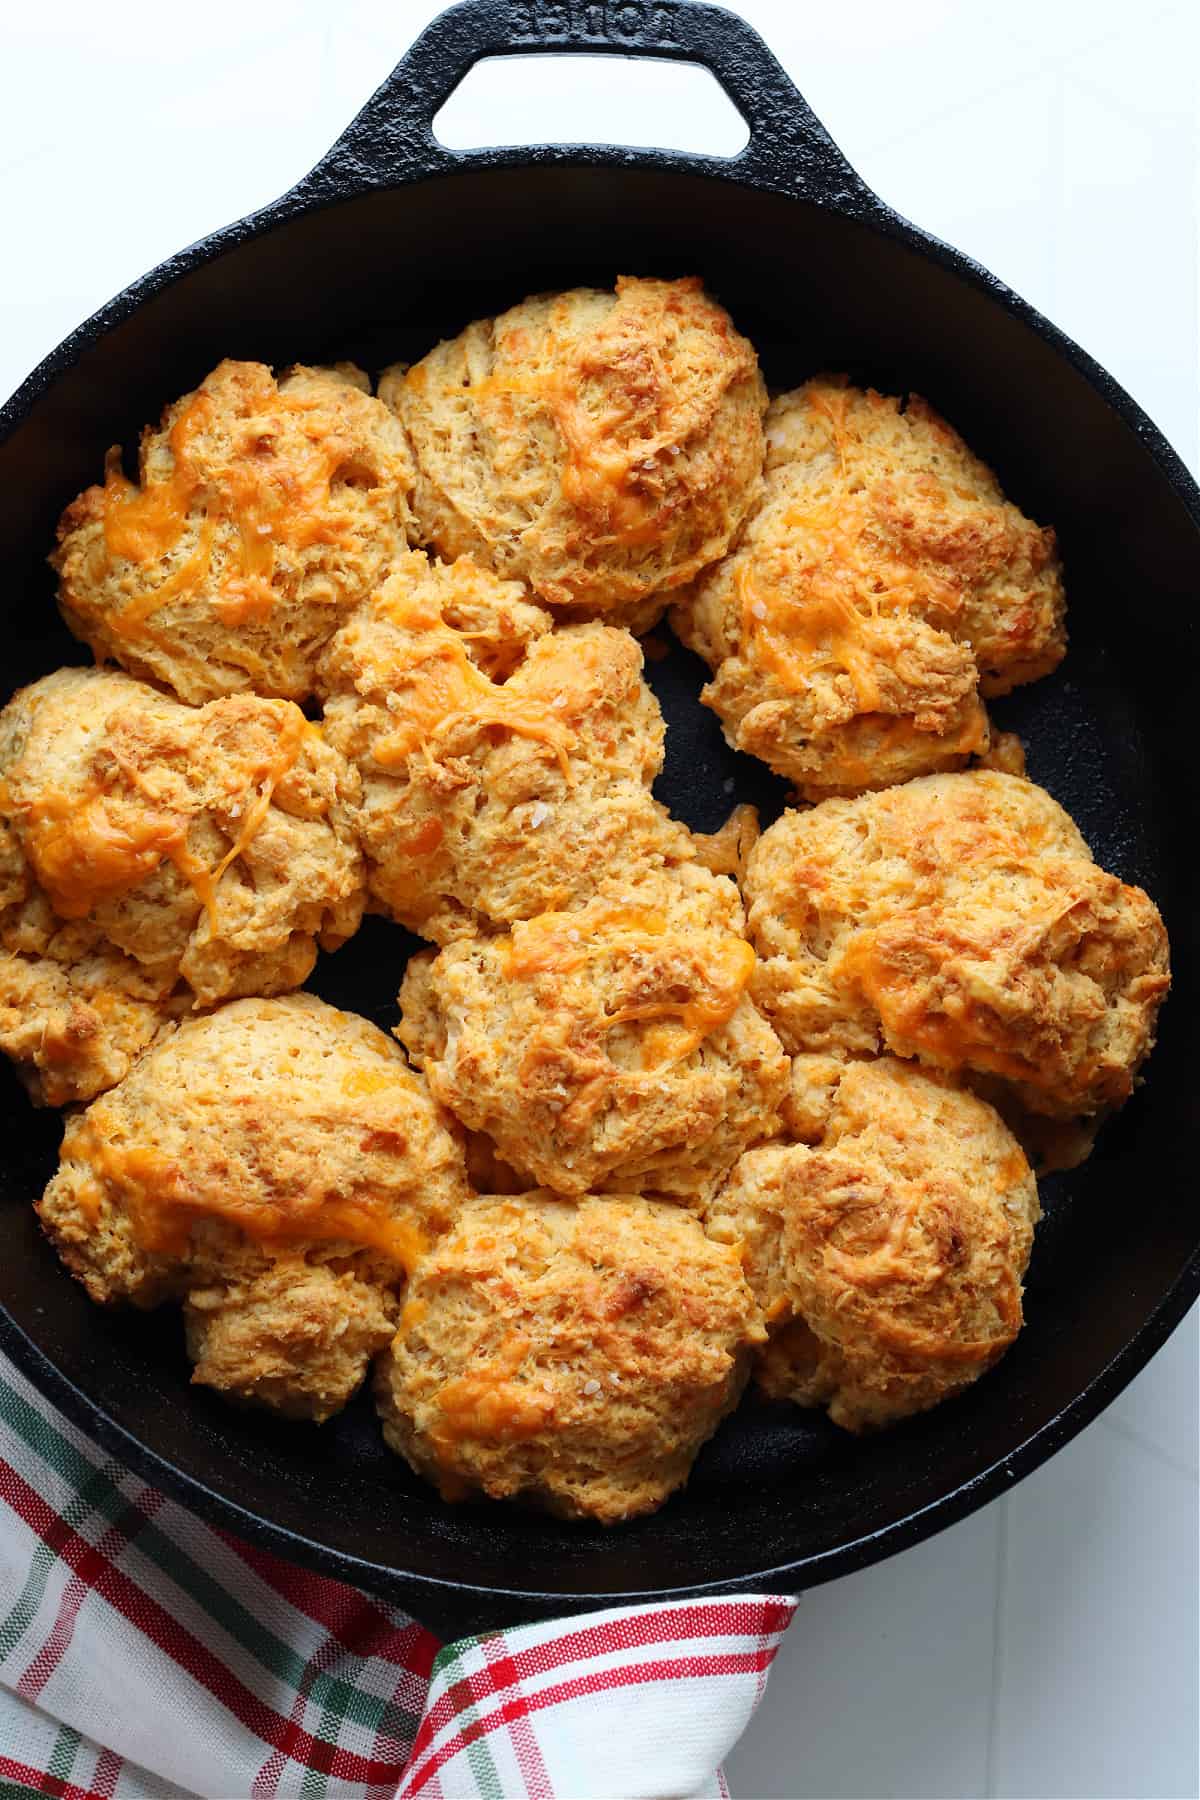 Biscuits in a black cast iron skillet on a white board.